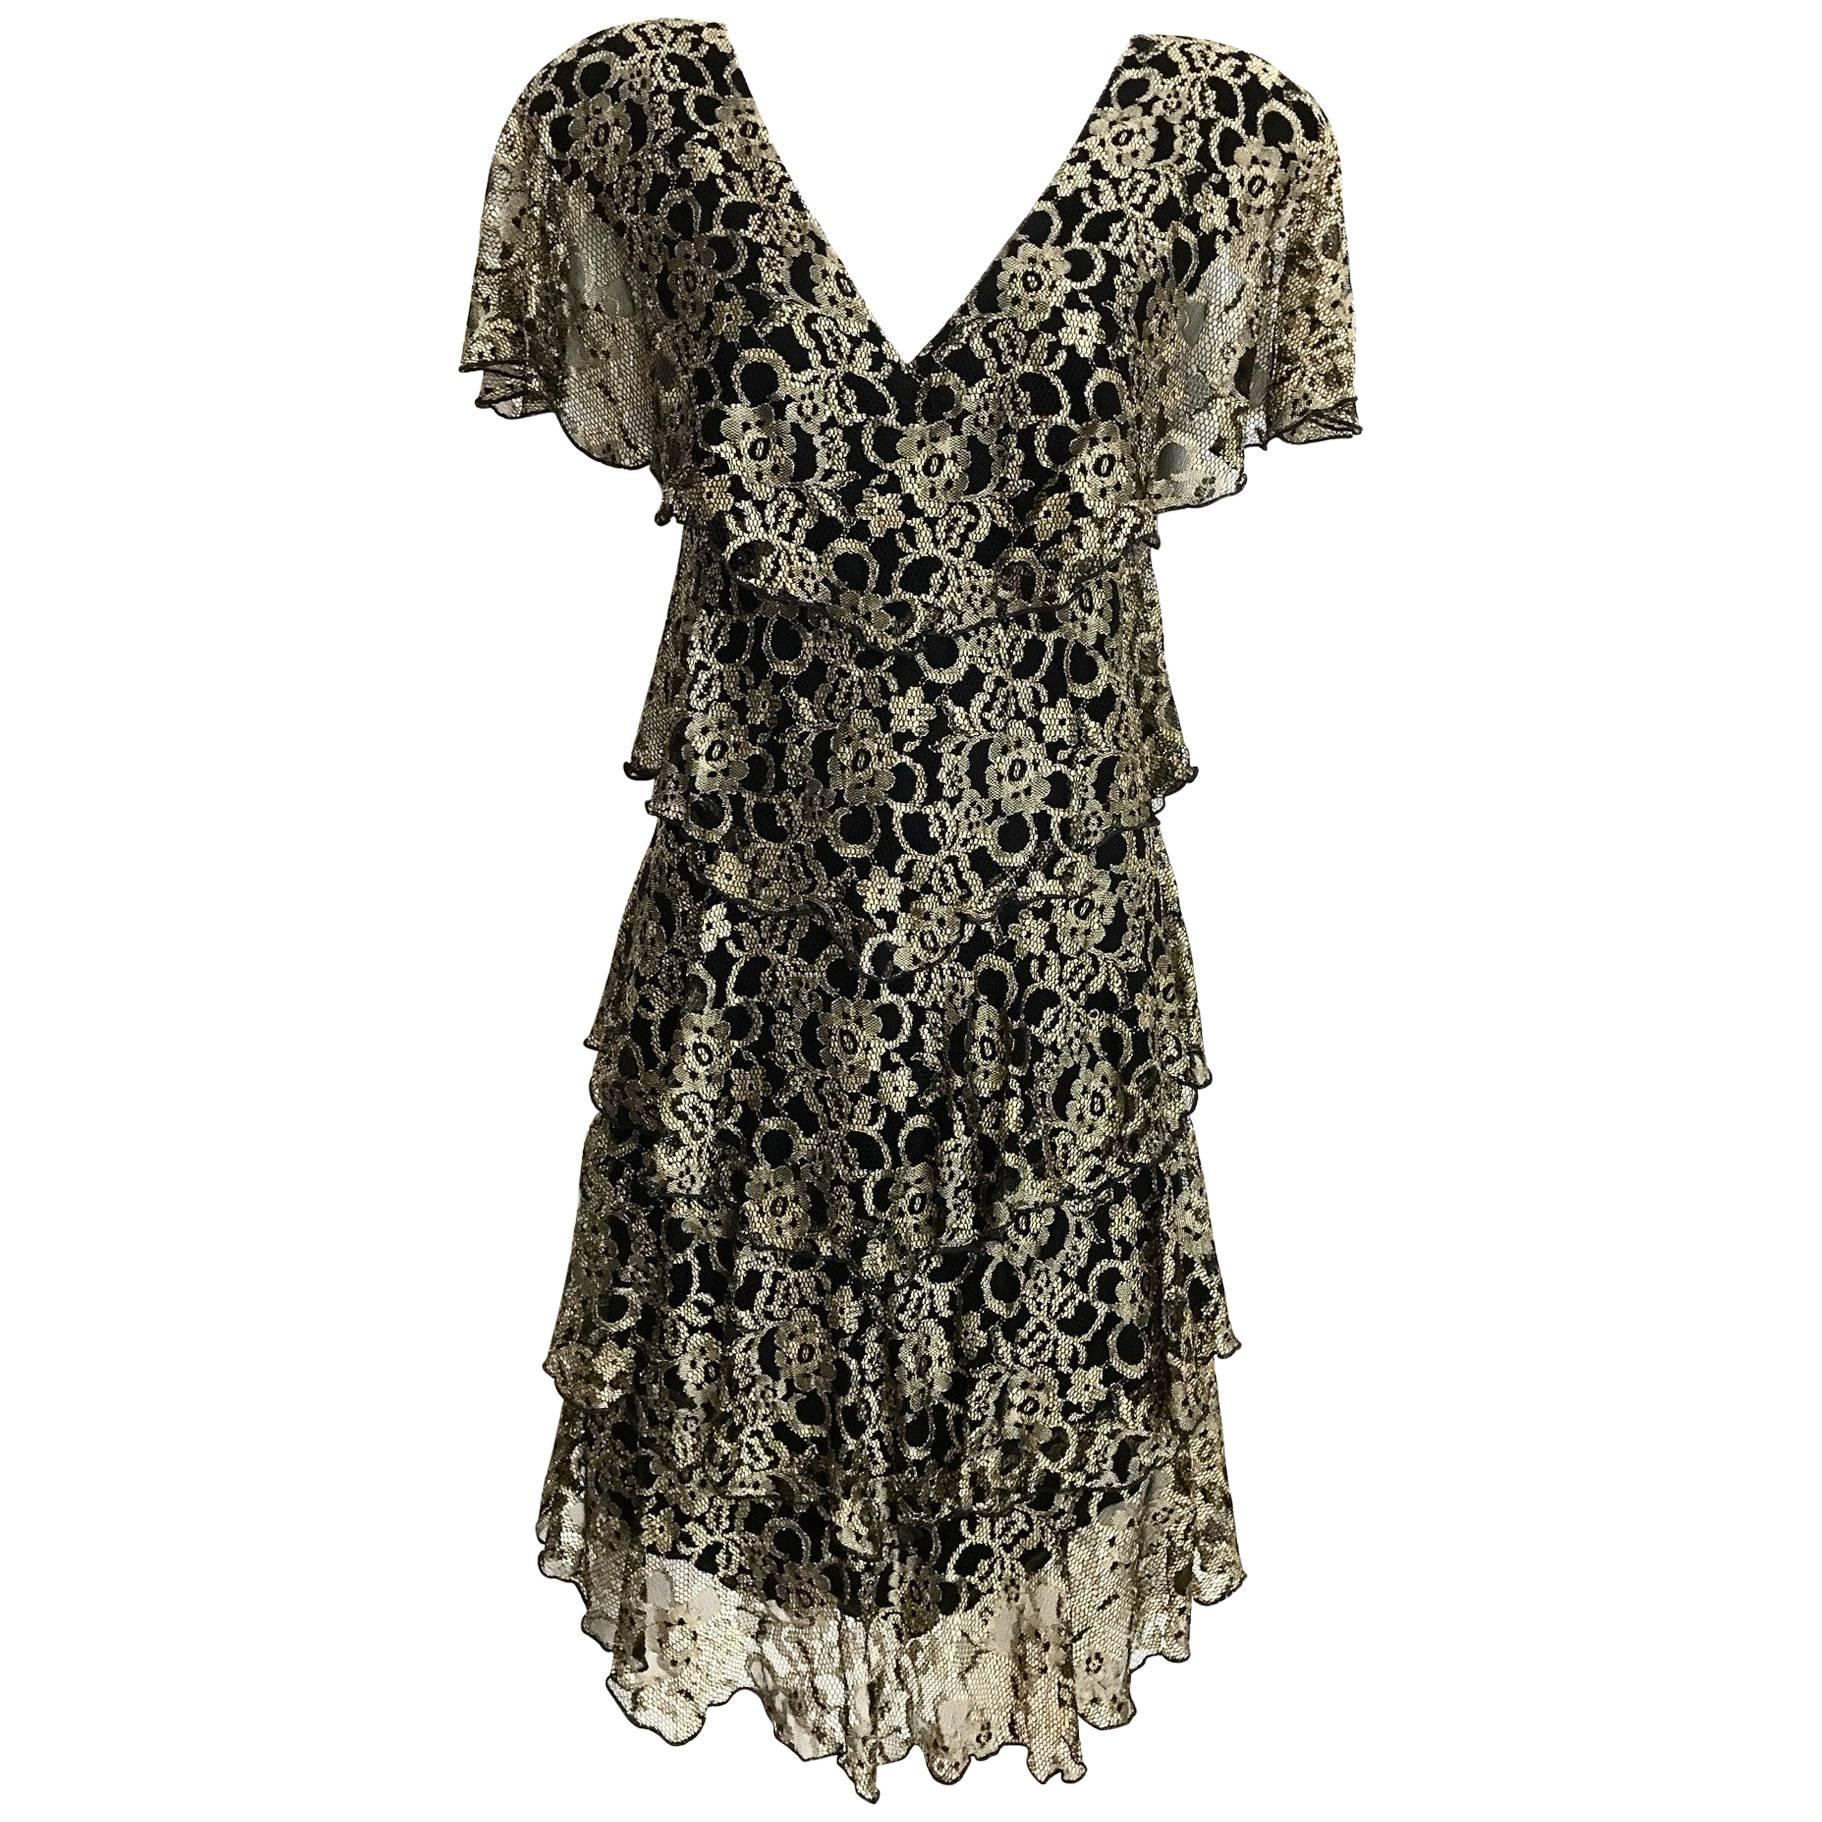 80s Holly Harp ruffle lace cocktail dress